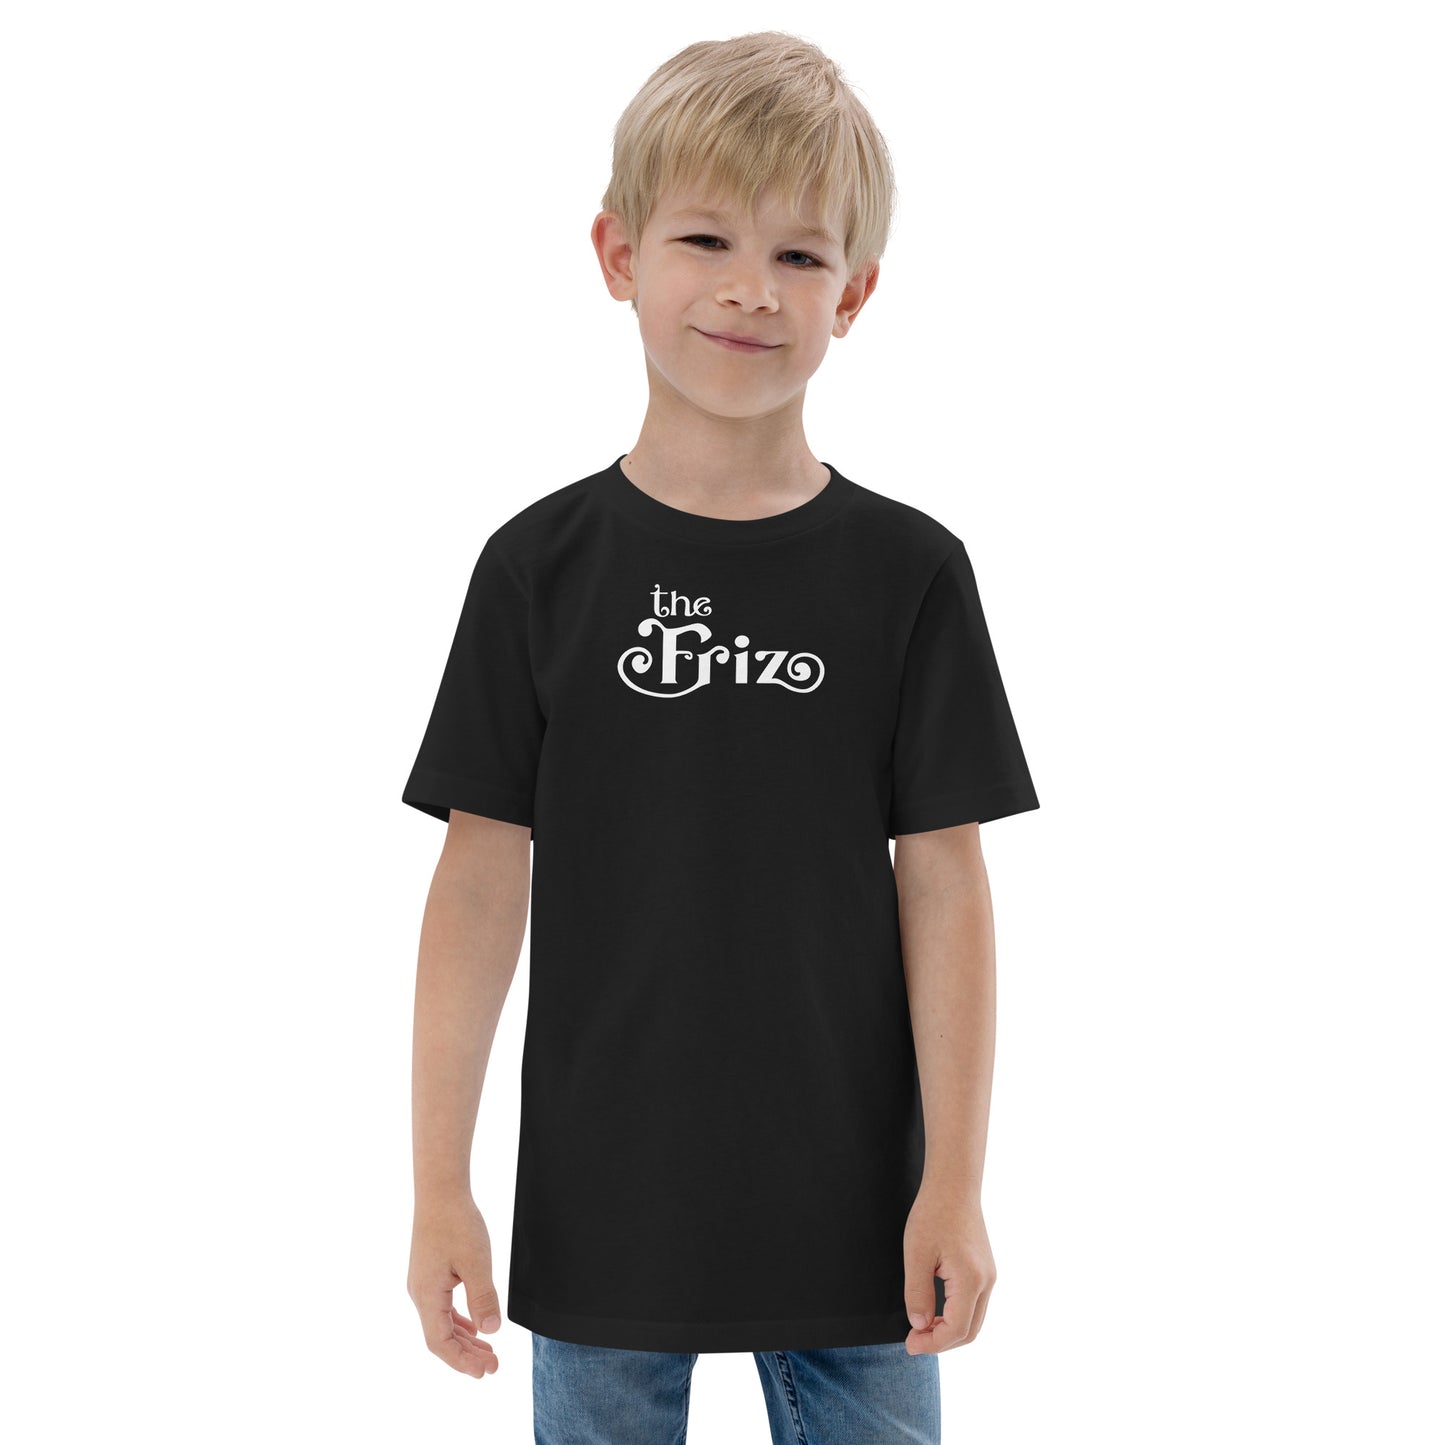 Youth T-shirt | The Friz